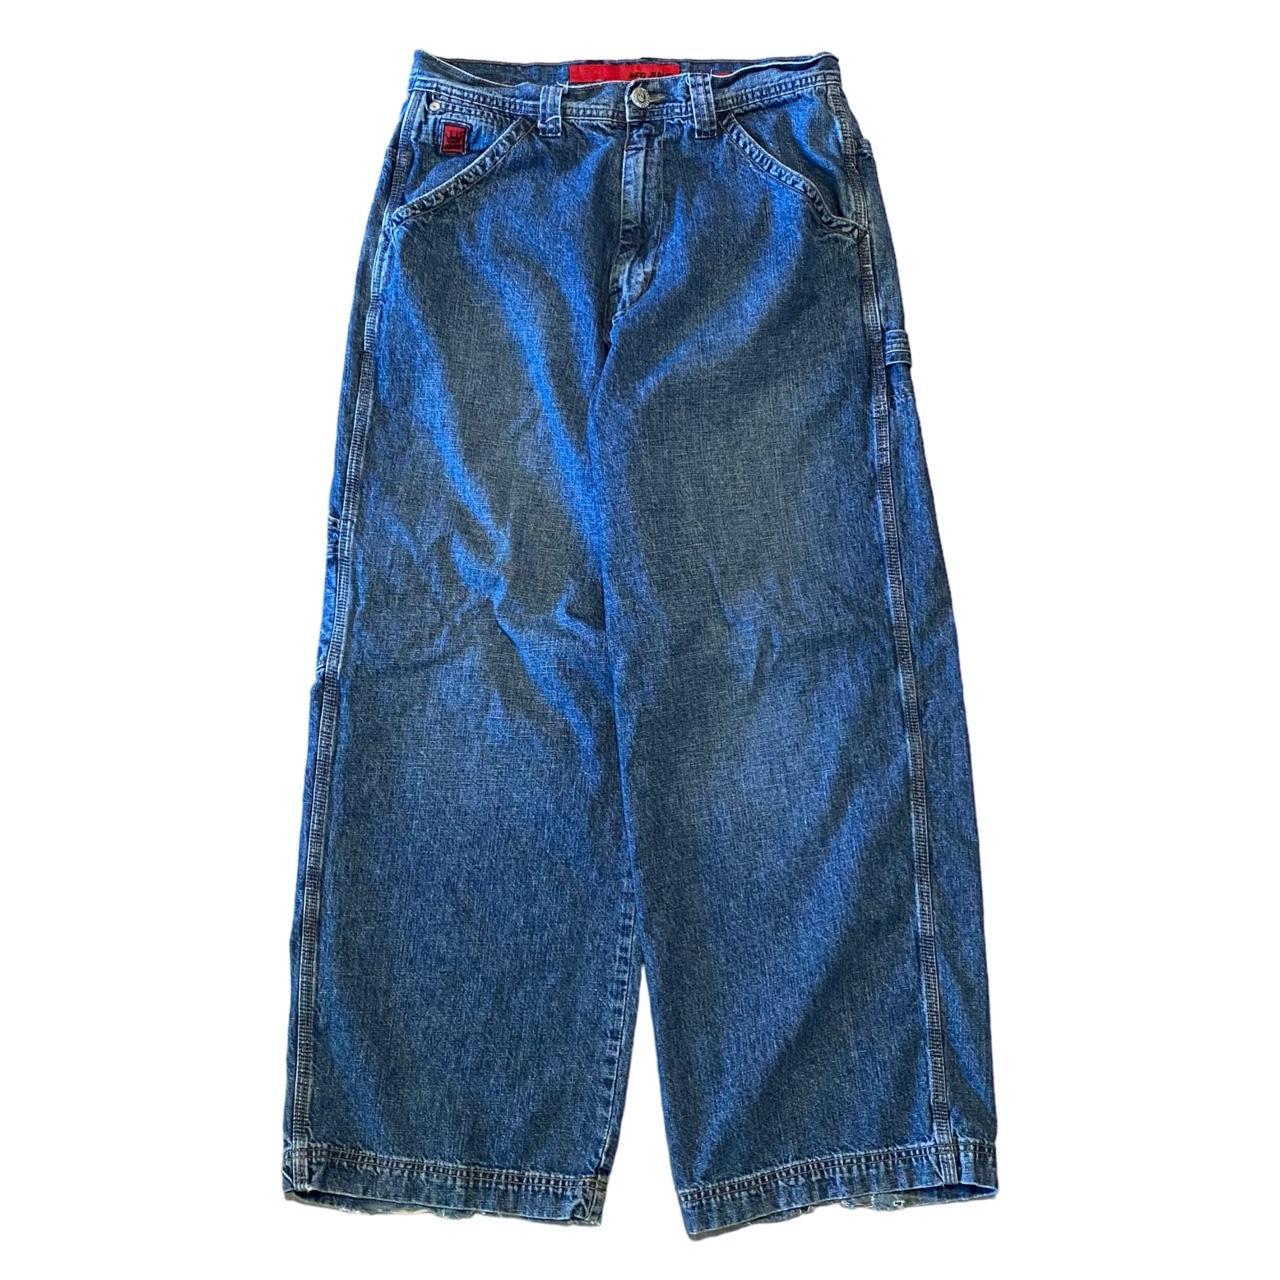 JNCO CROWN RARE JEANS LEG OPENING 11 inches... - Depop